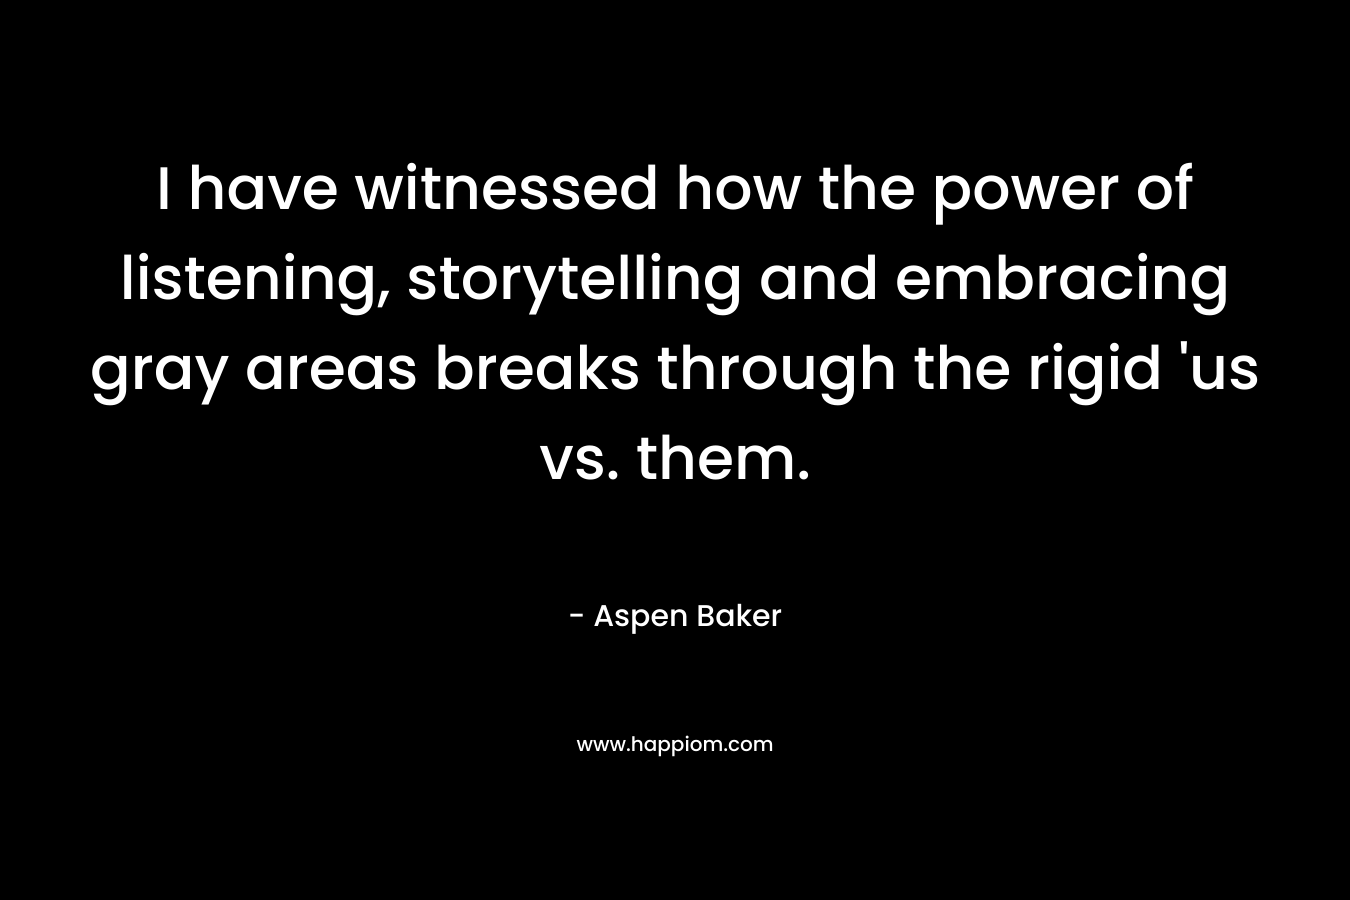 I have witnessed how the power of listening, storytelling and embracing gray areas breaks through the rigid ‘us vs. them. – Aspen Baker